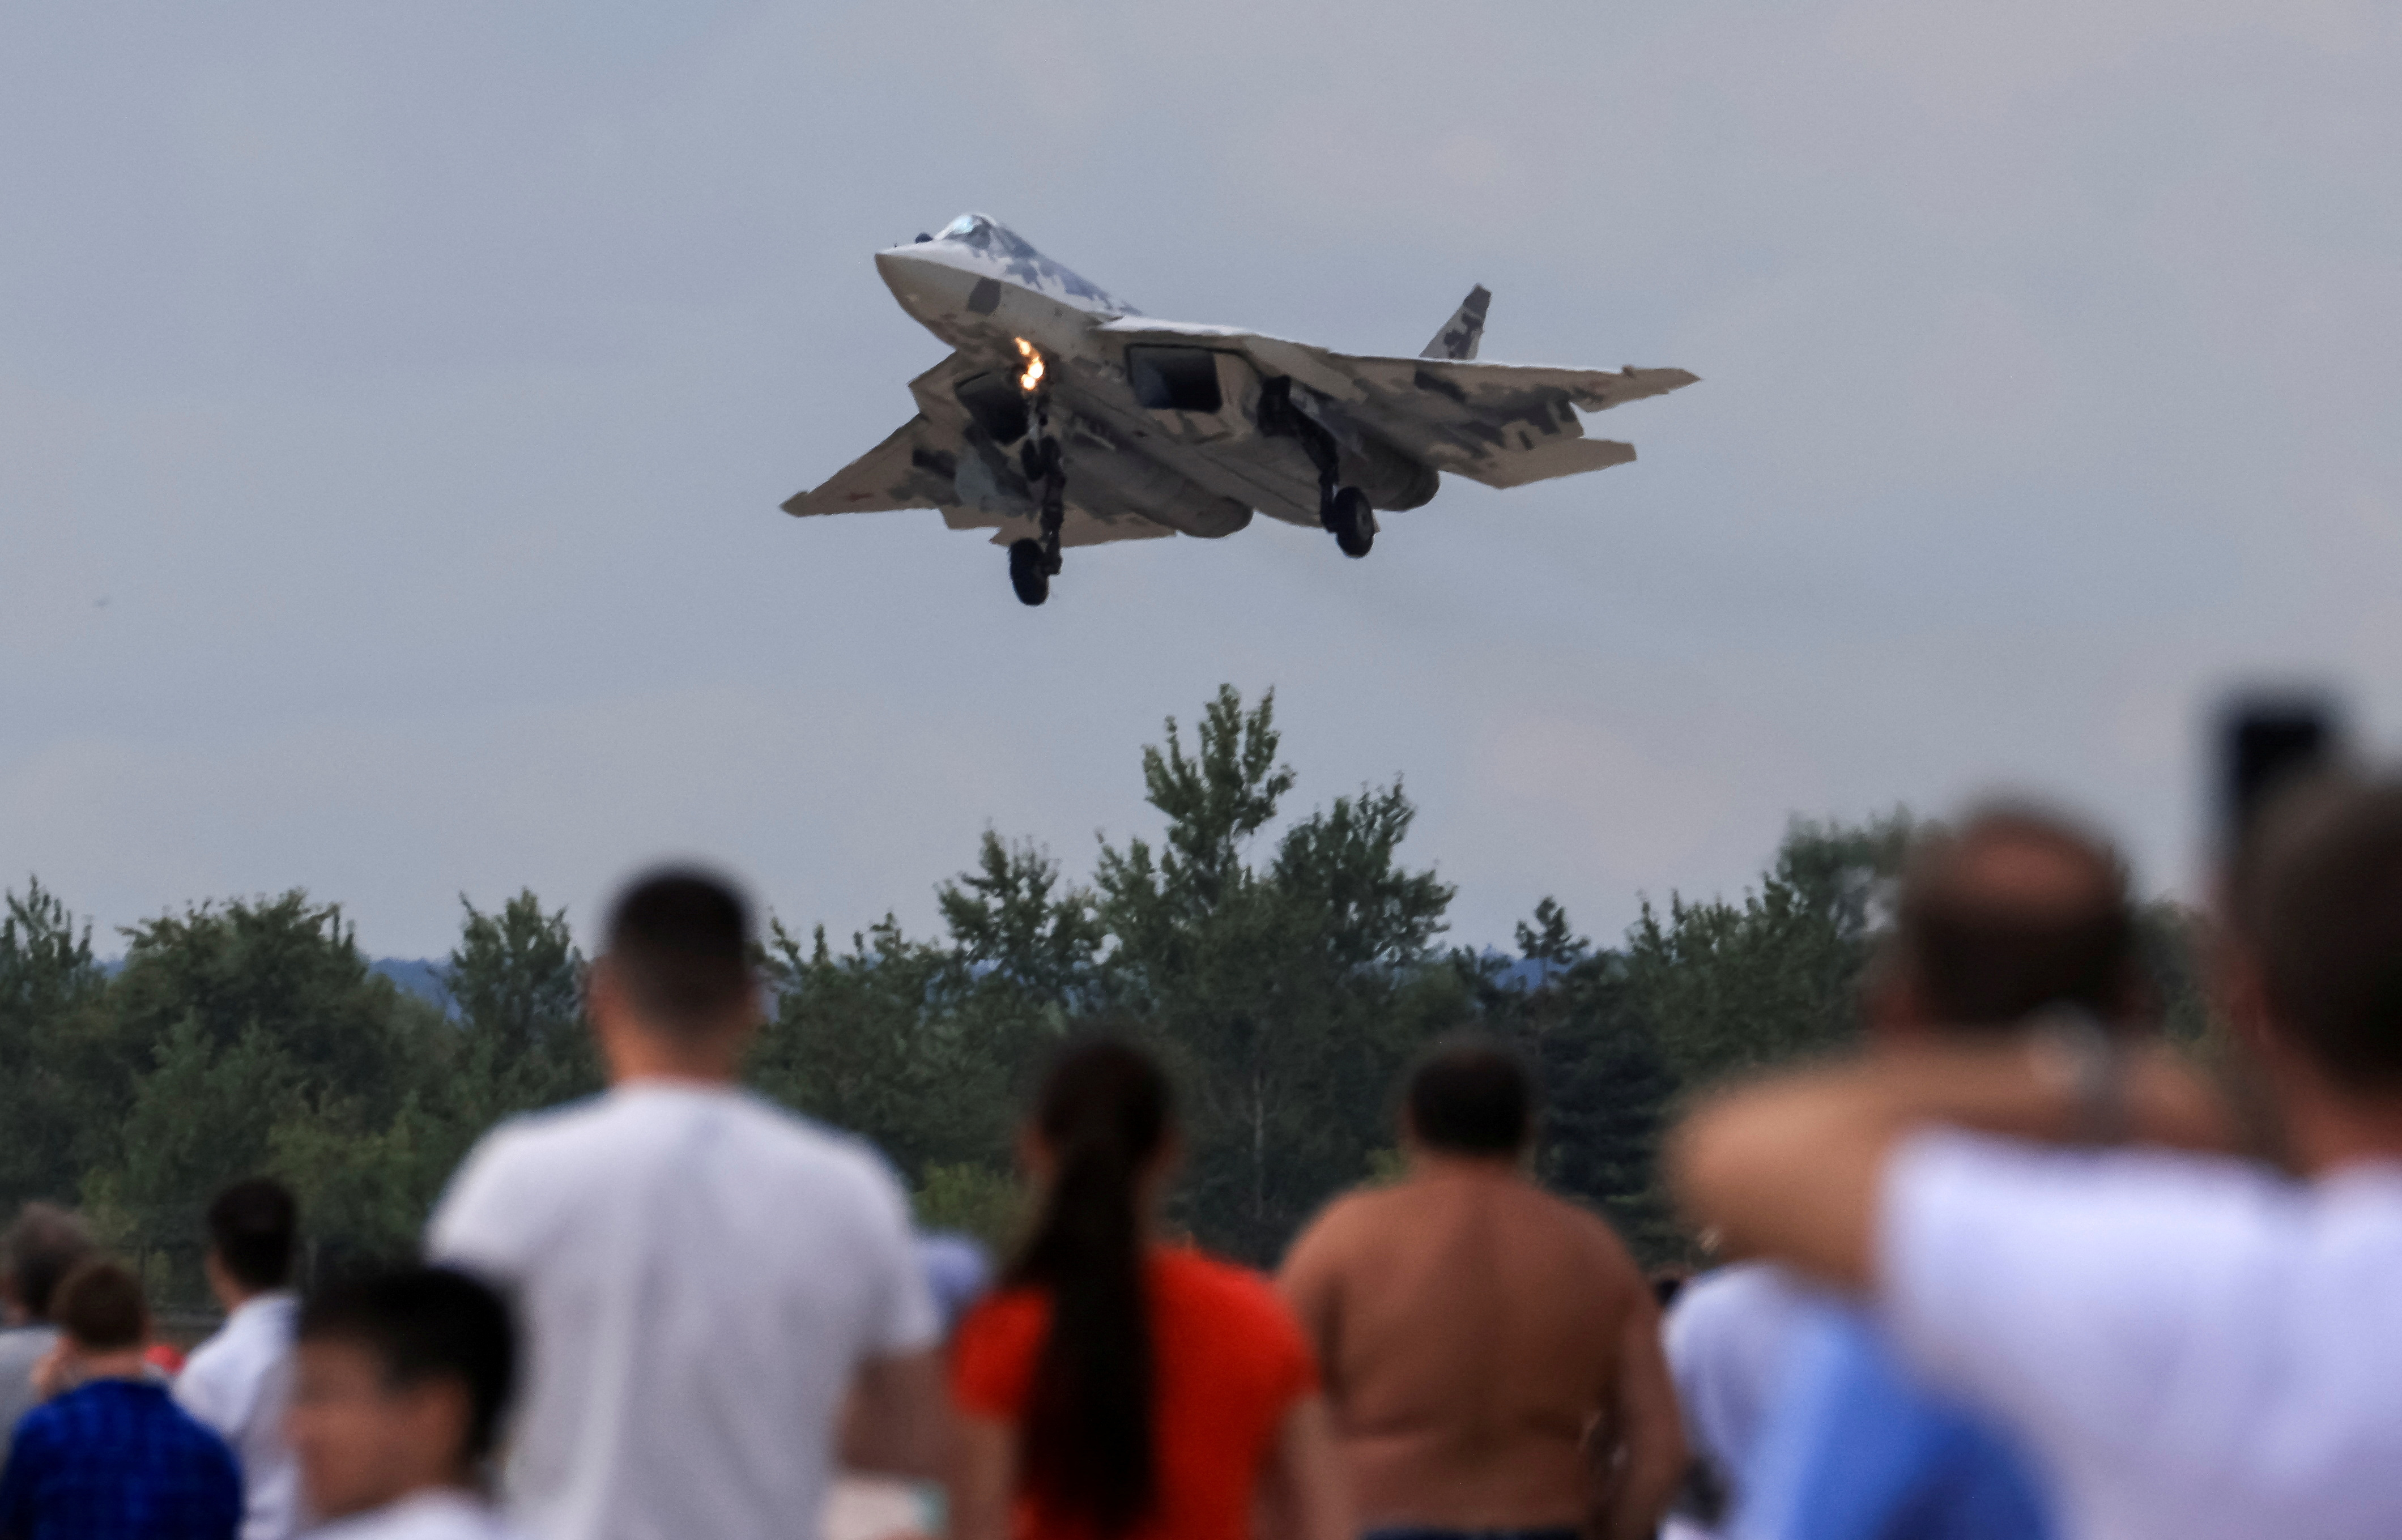 The MAKS 2021 air show in Zhukovsky, outside Moscow